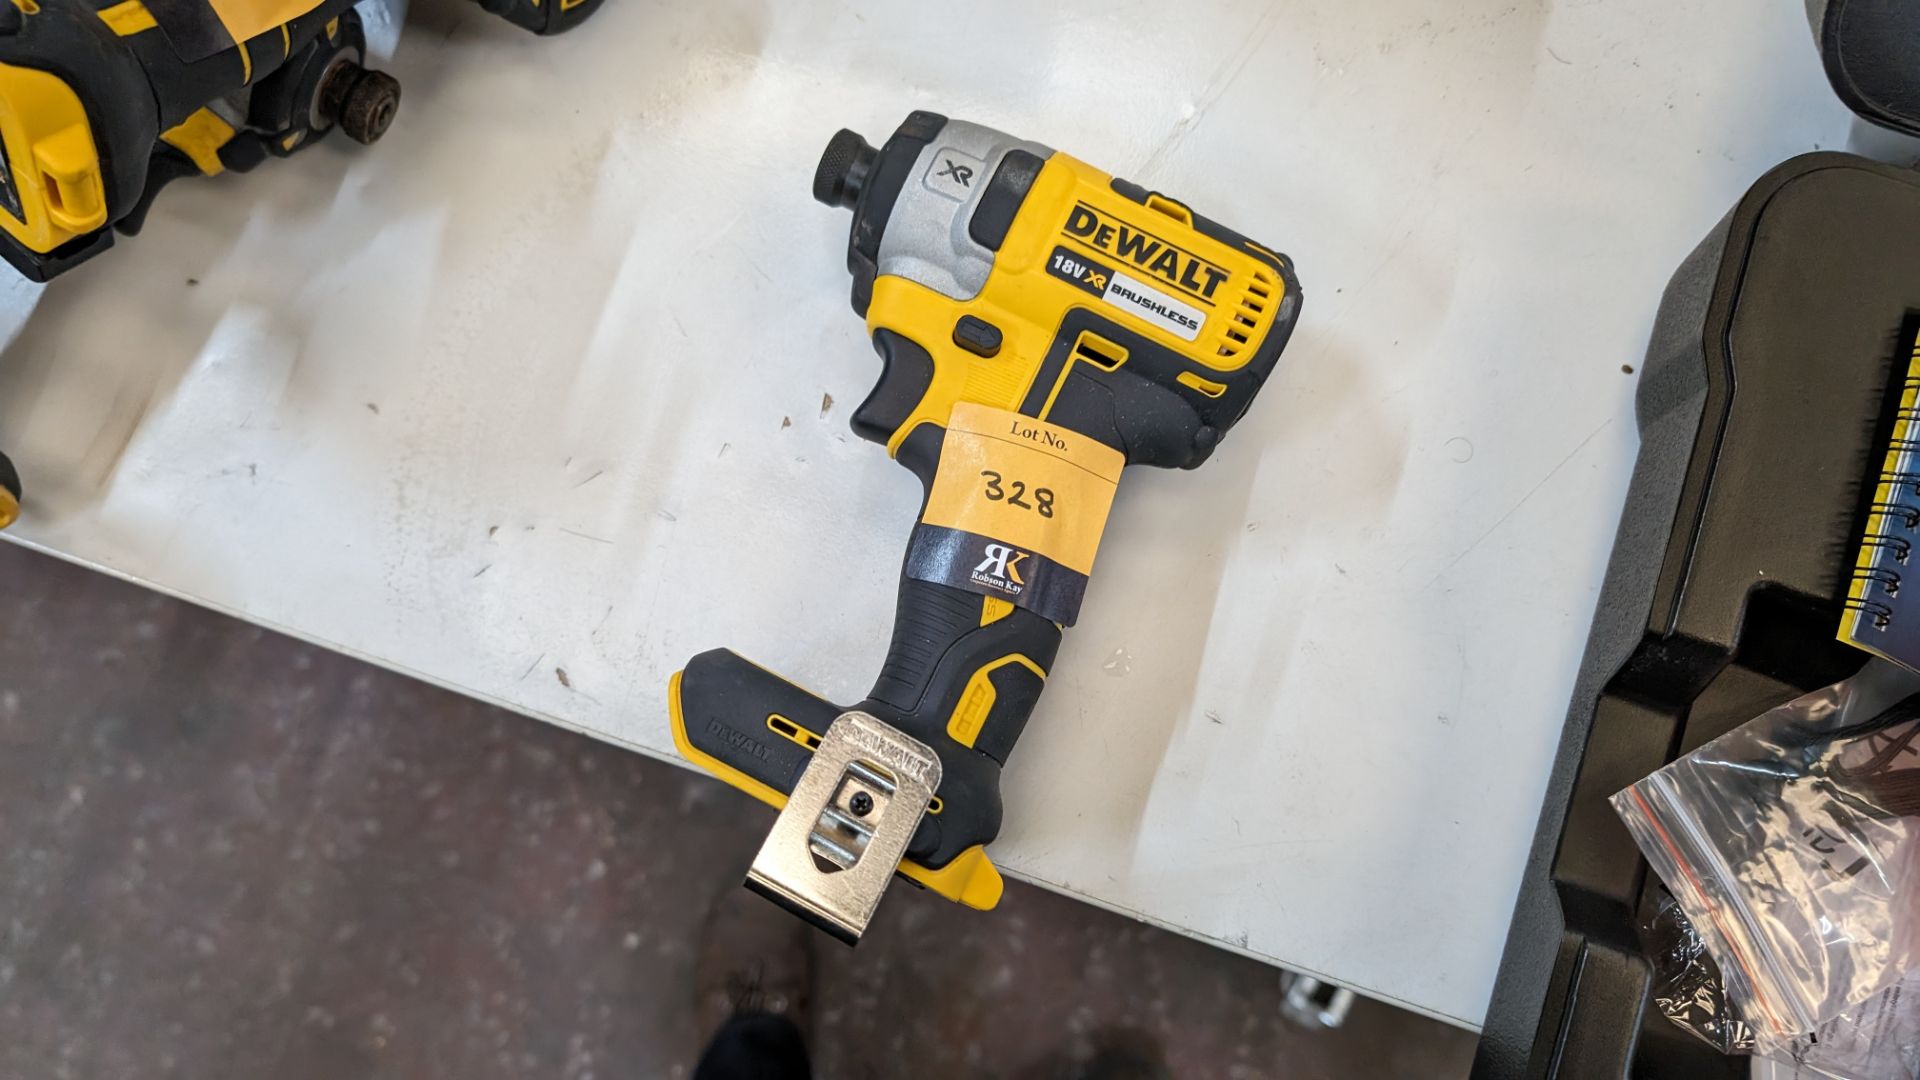 DeWalt DCF887 cordless driver - no battery or charger - Image 2 of 6